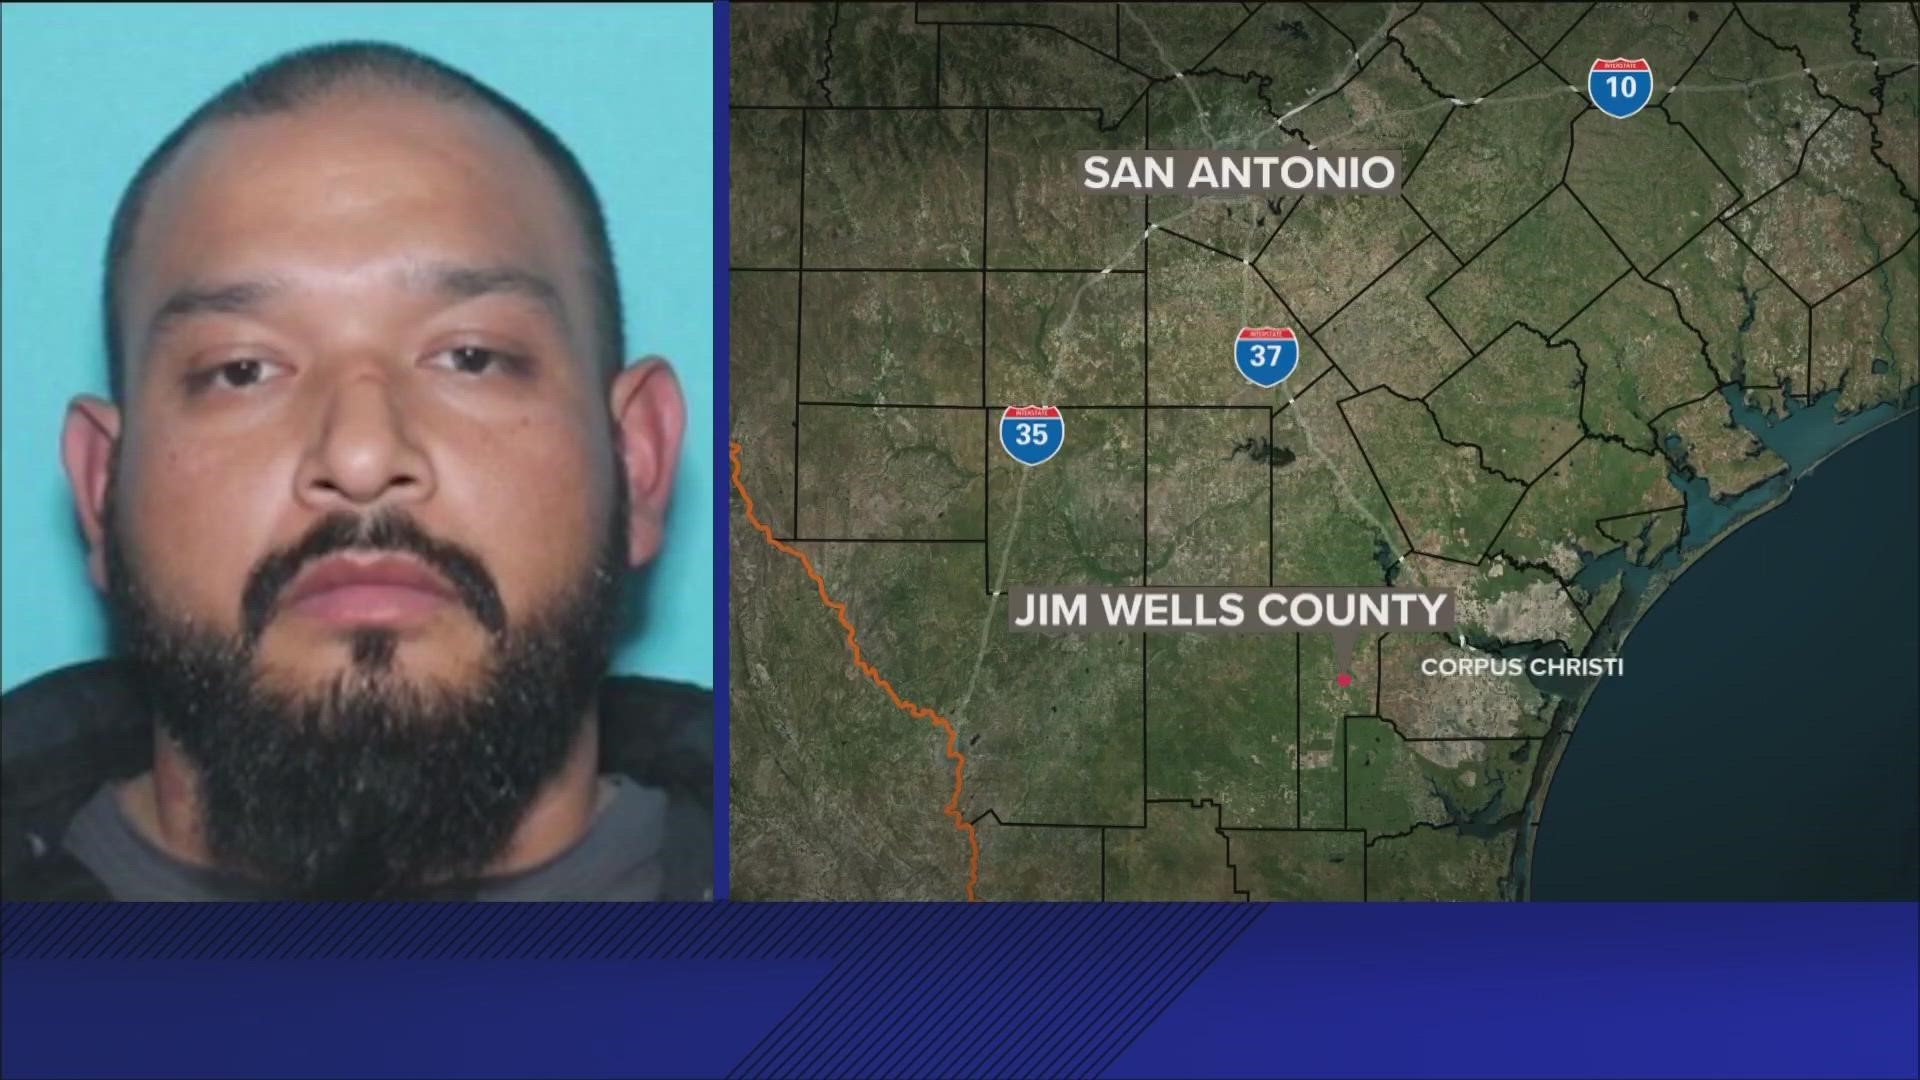 Eric Lee Lopez Berber was set to appear in court over the 2019 murder of his wife. Authorities say he was last seen on the east side of San Antonio.